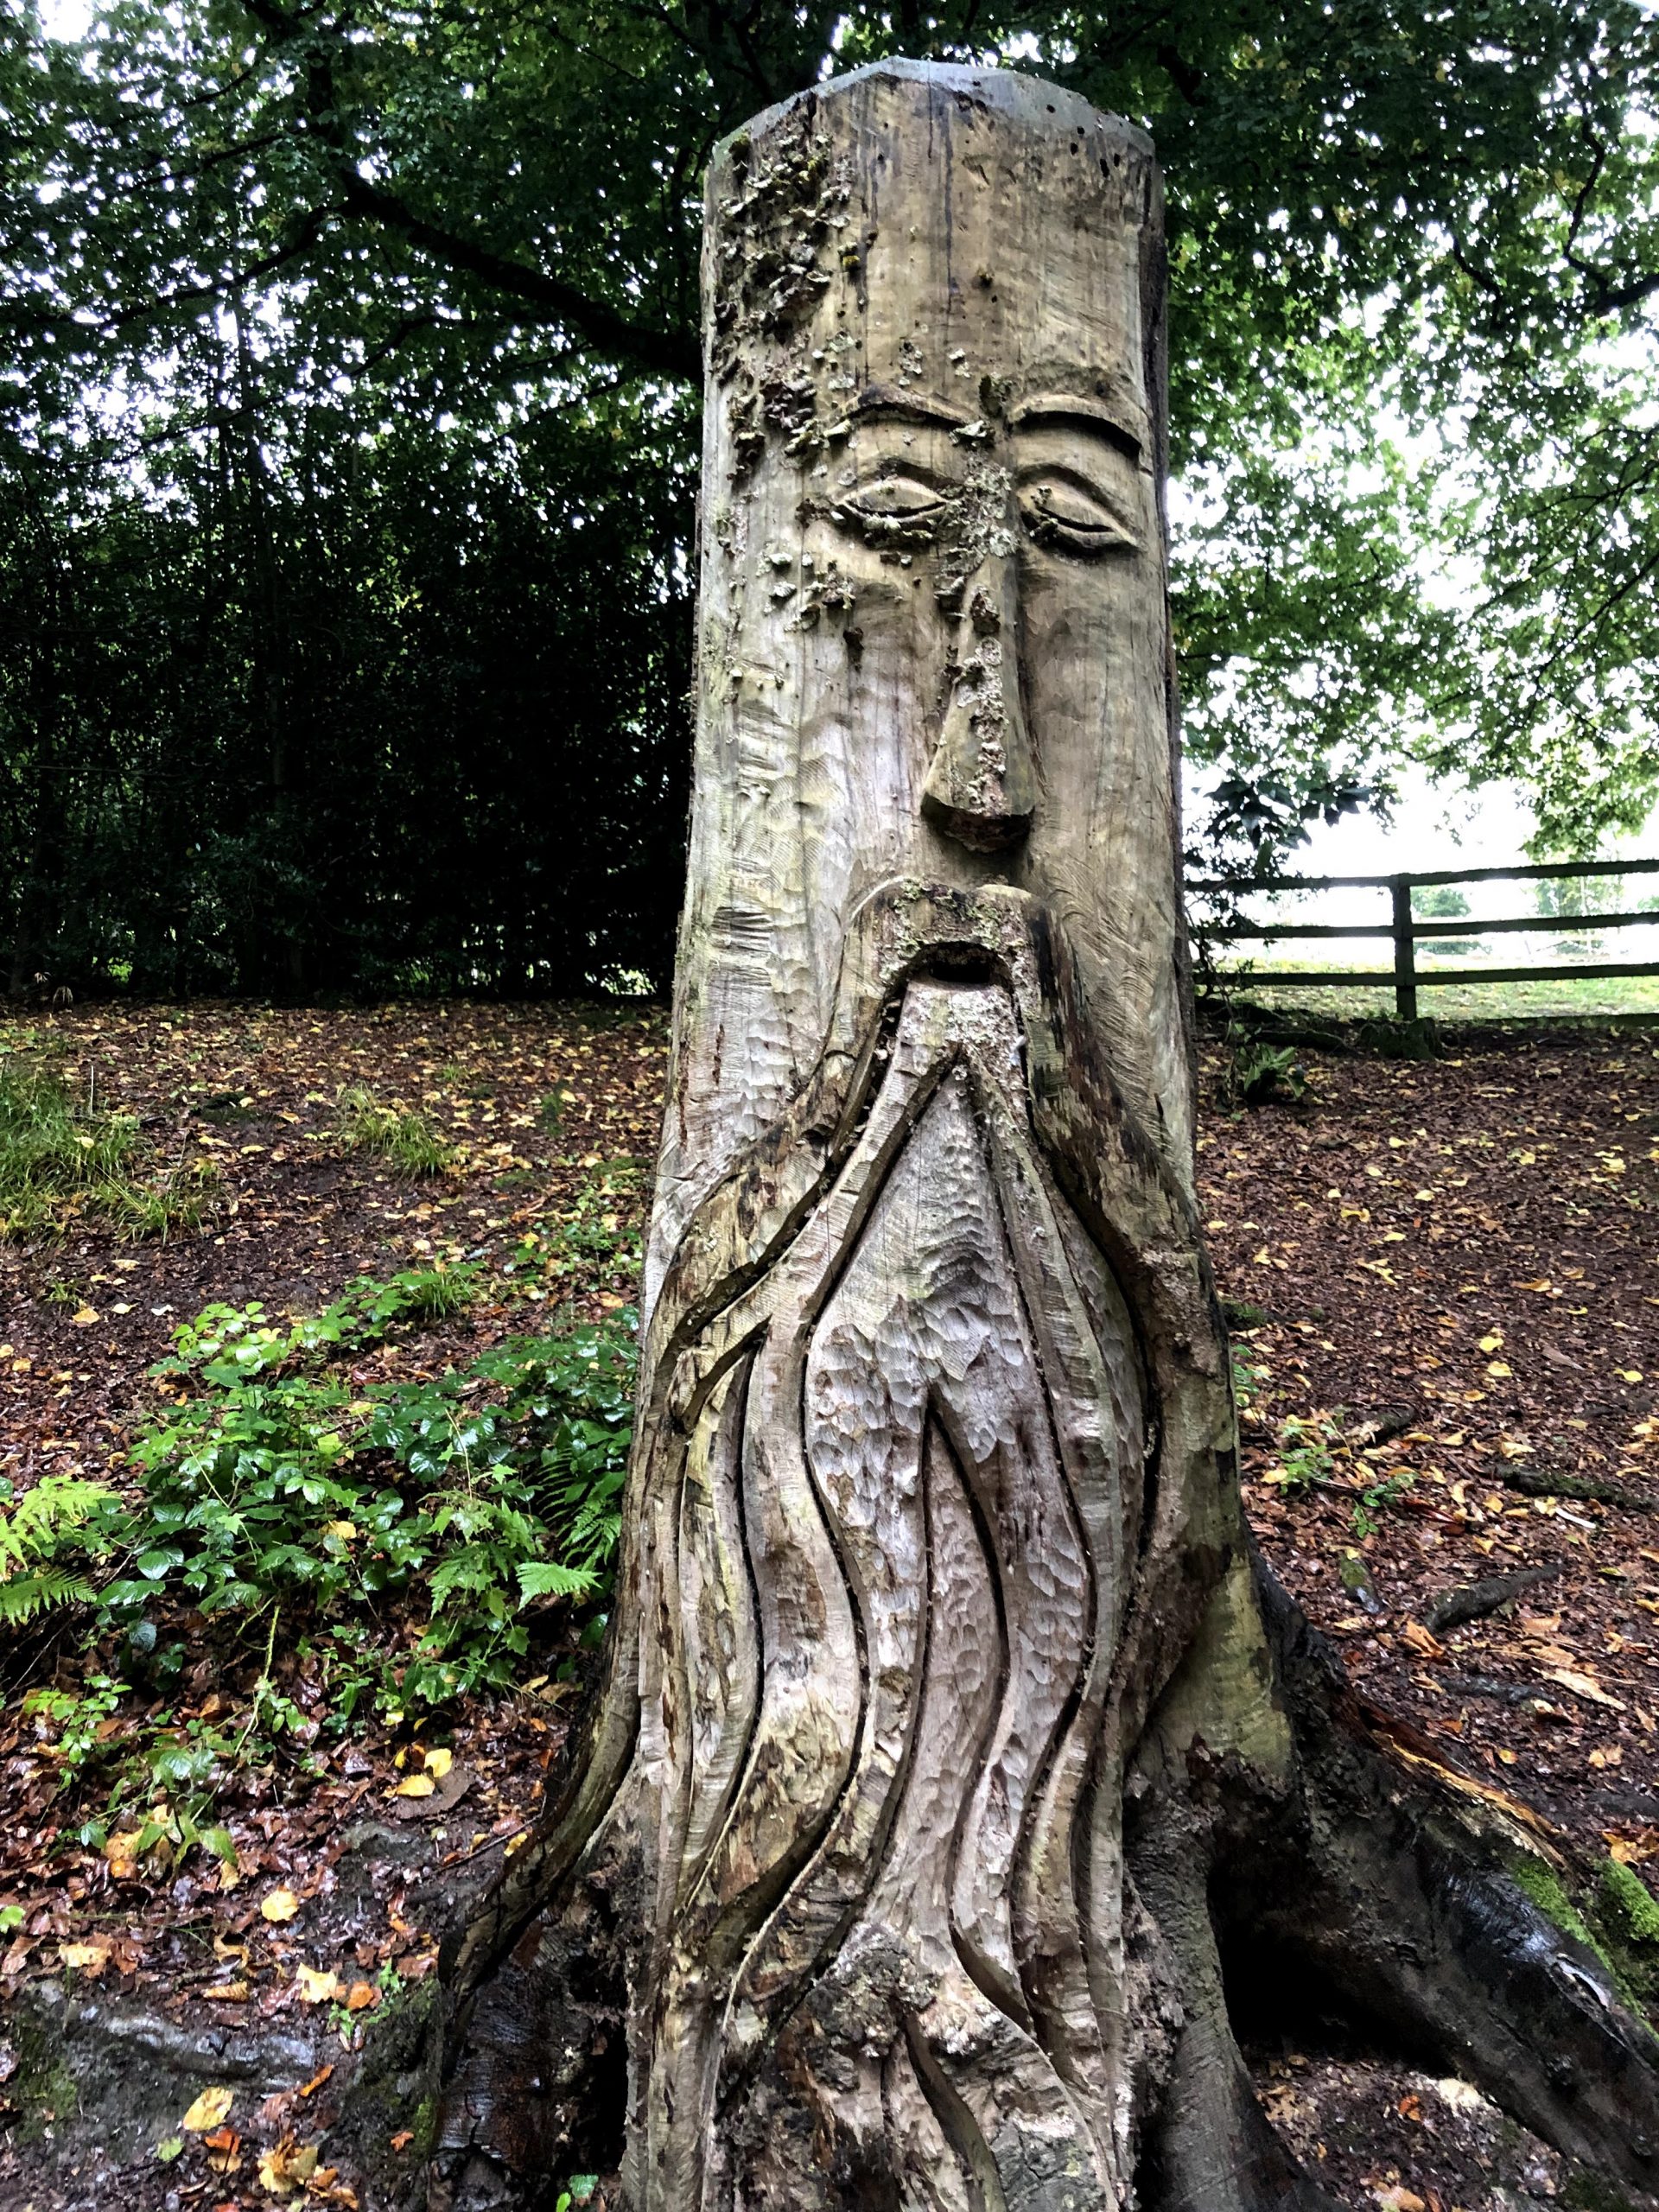 Beautiful old tree sculpture in Old Mother Shipton Cave attraction